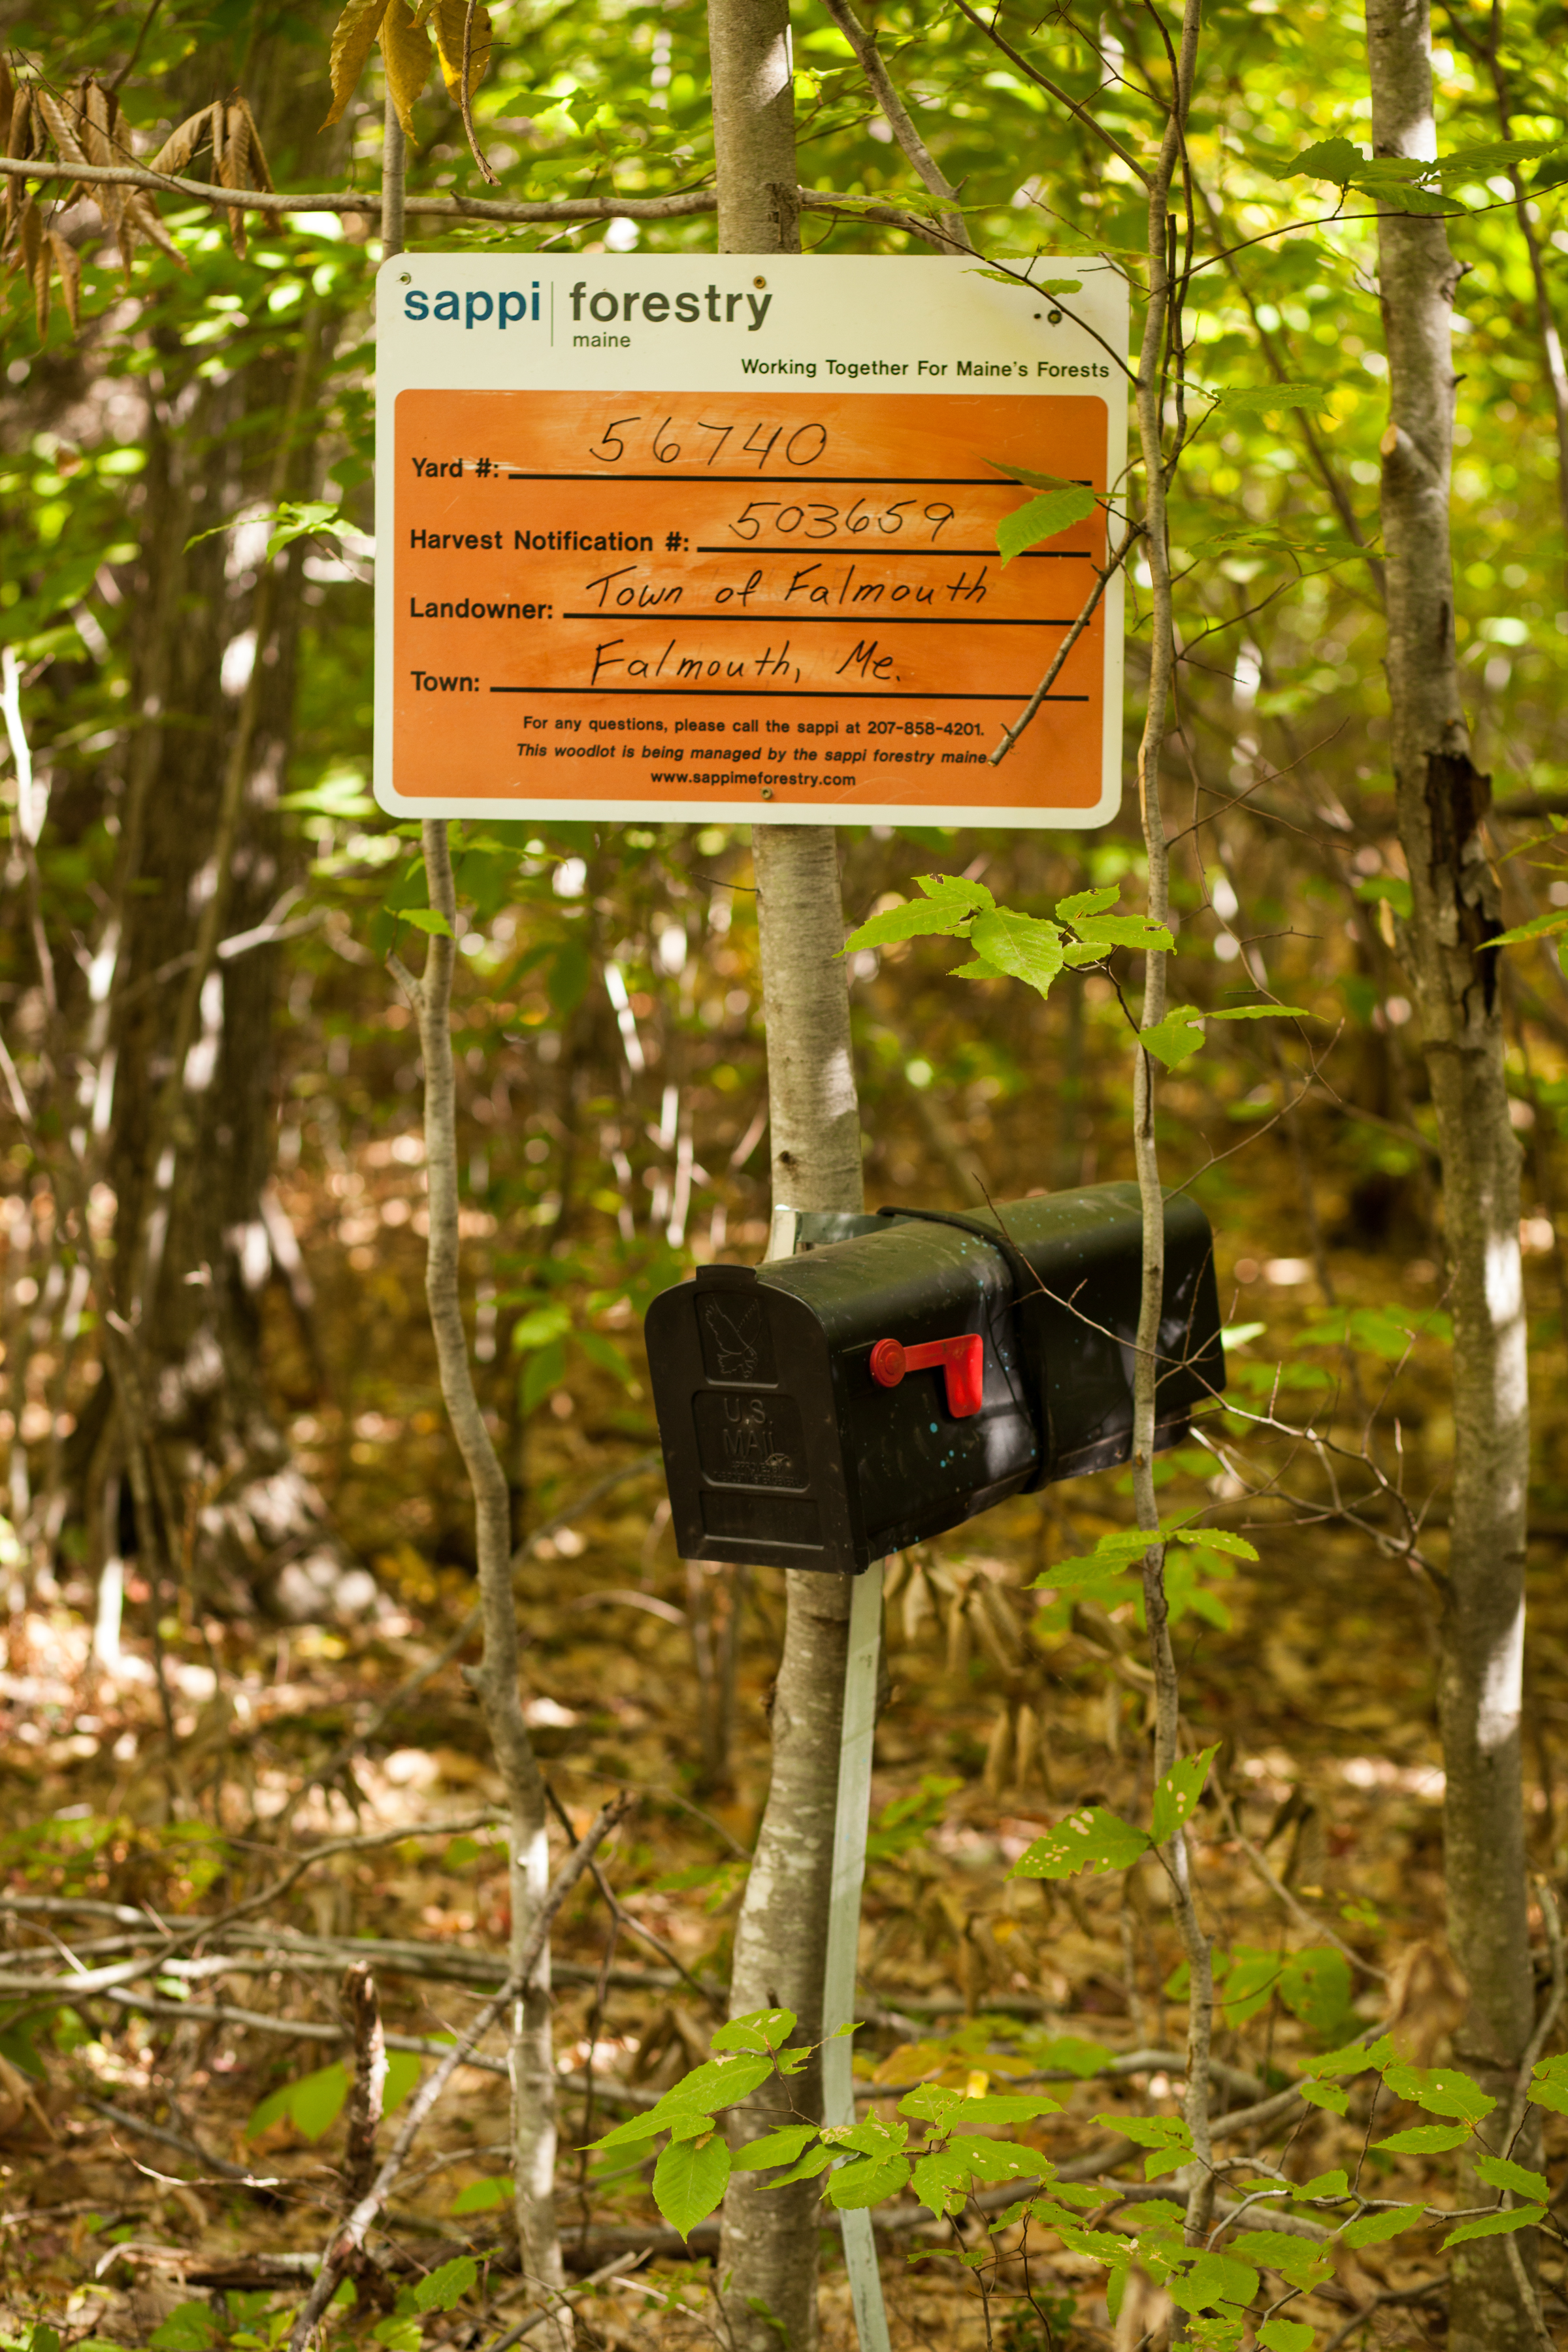 North Falmouth Sappi Forest_100217-382.JPG